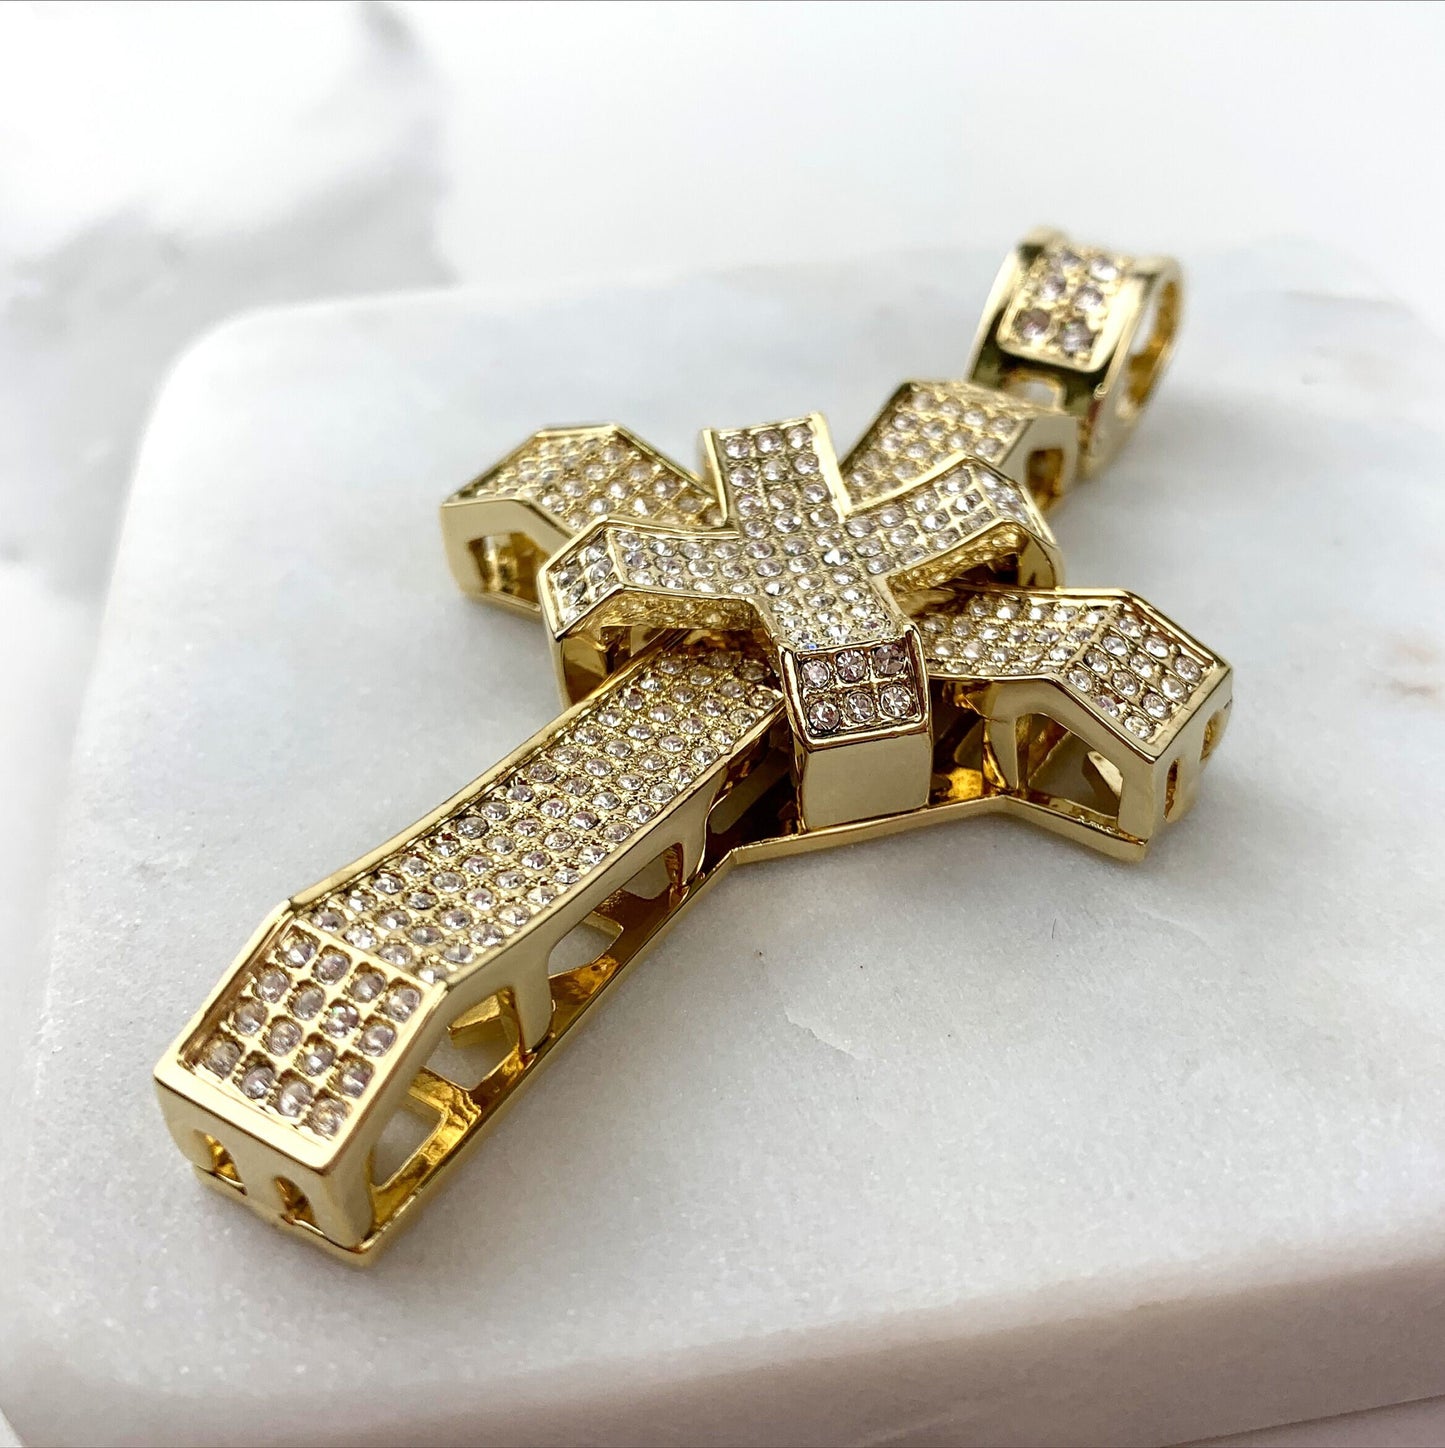 18k Gold Filled Iced Cubic Zirconia Cross Pendant Wholesale Jewelry Supplies